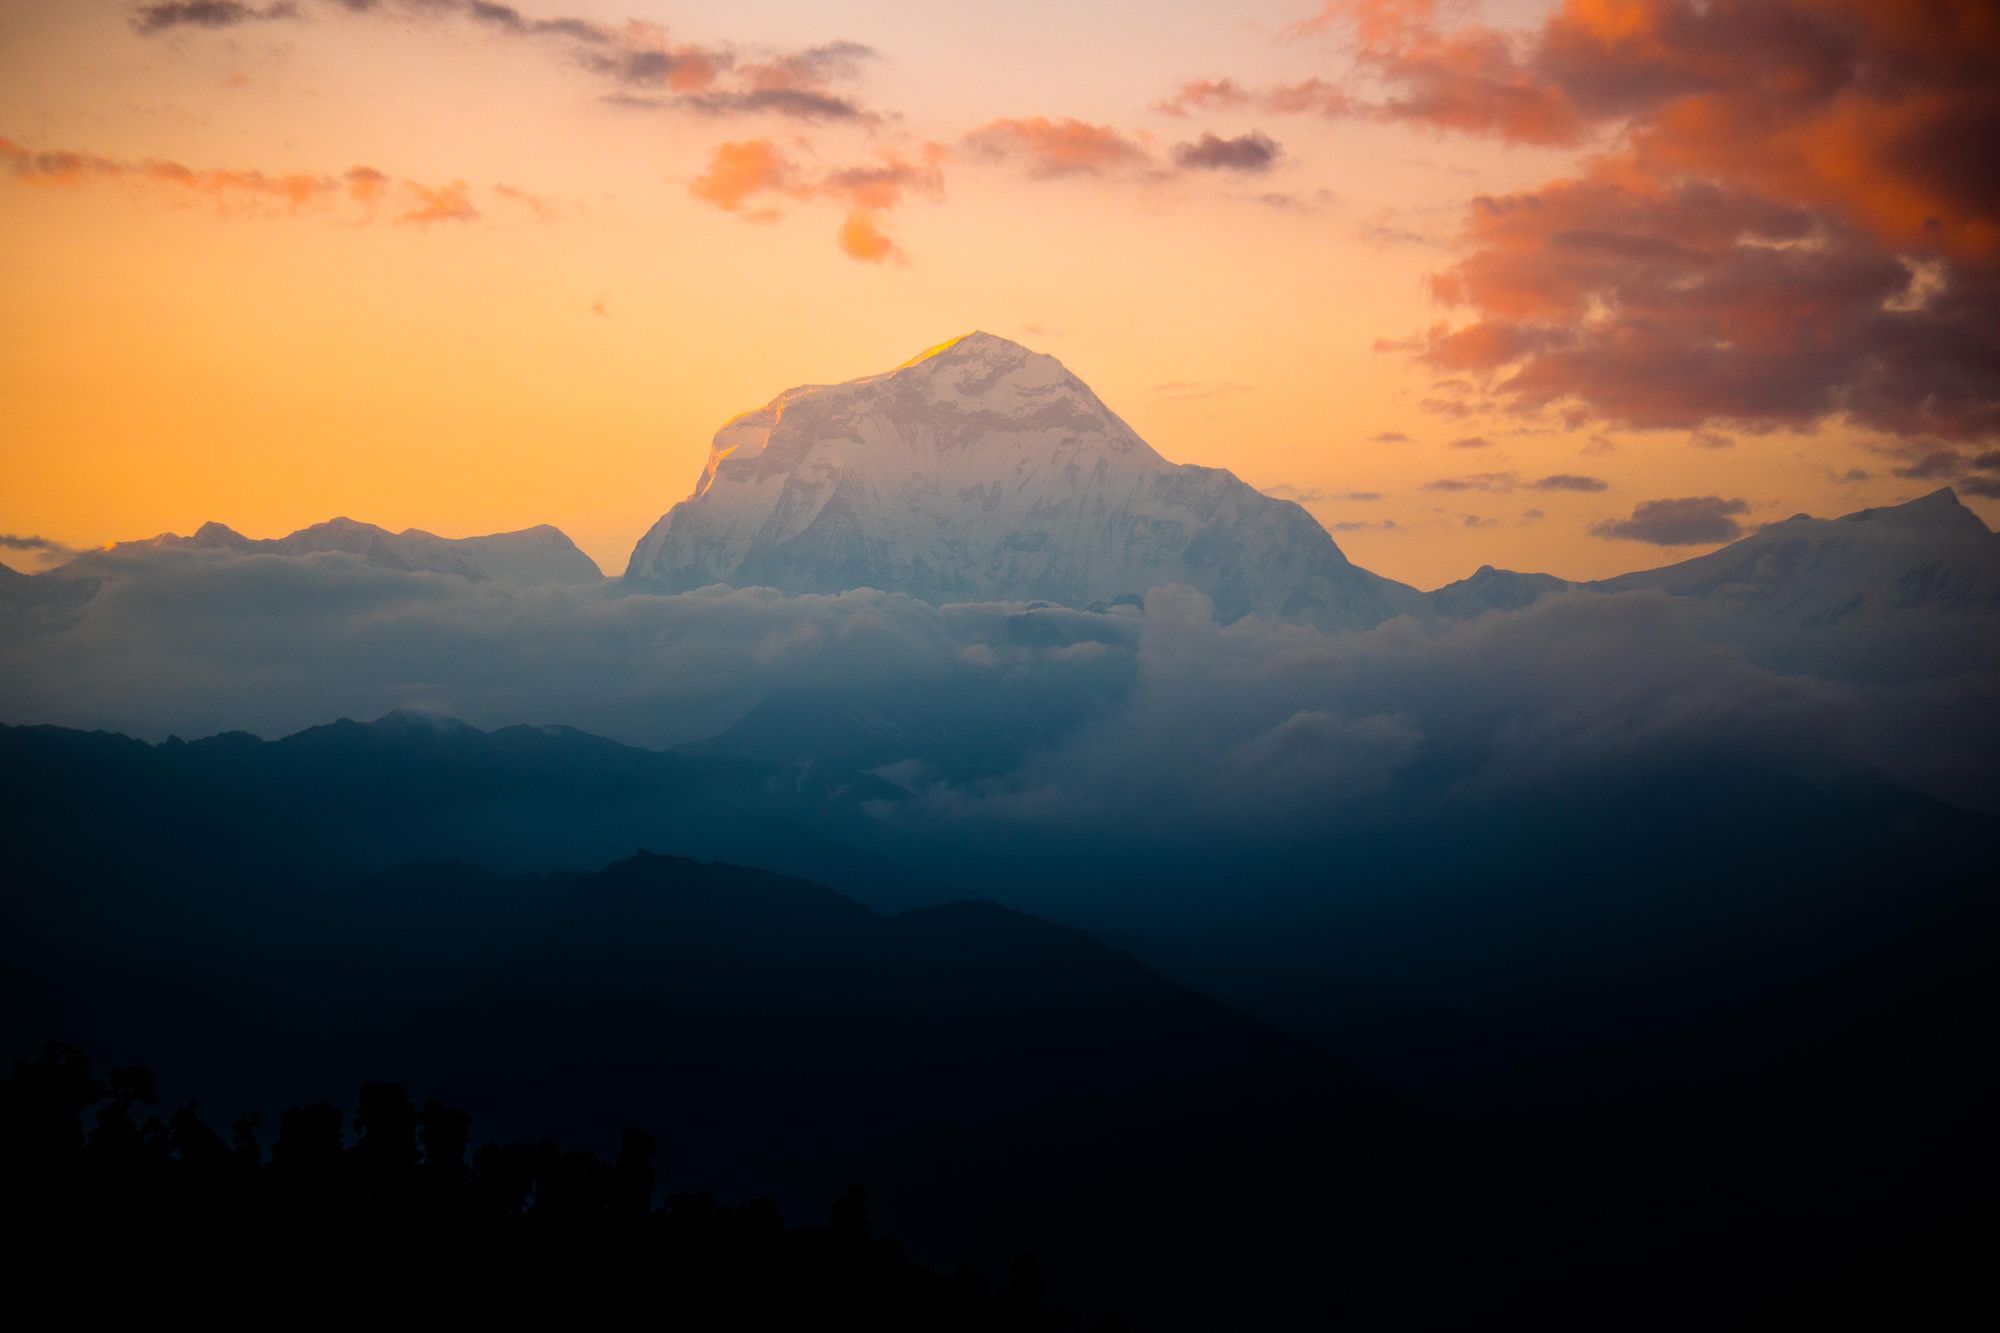 The mighty Annapurna massif rises above the clouds as the sun sets in Nepal. Photo: Josh Edwards